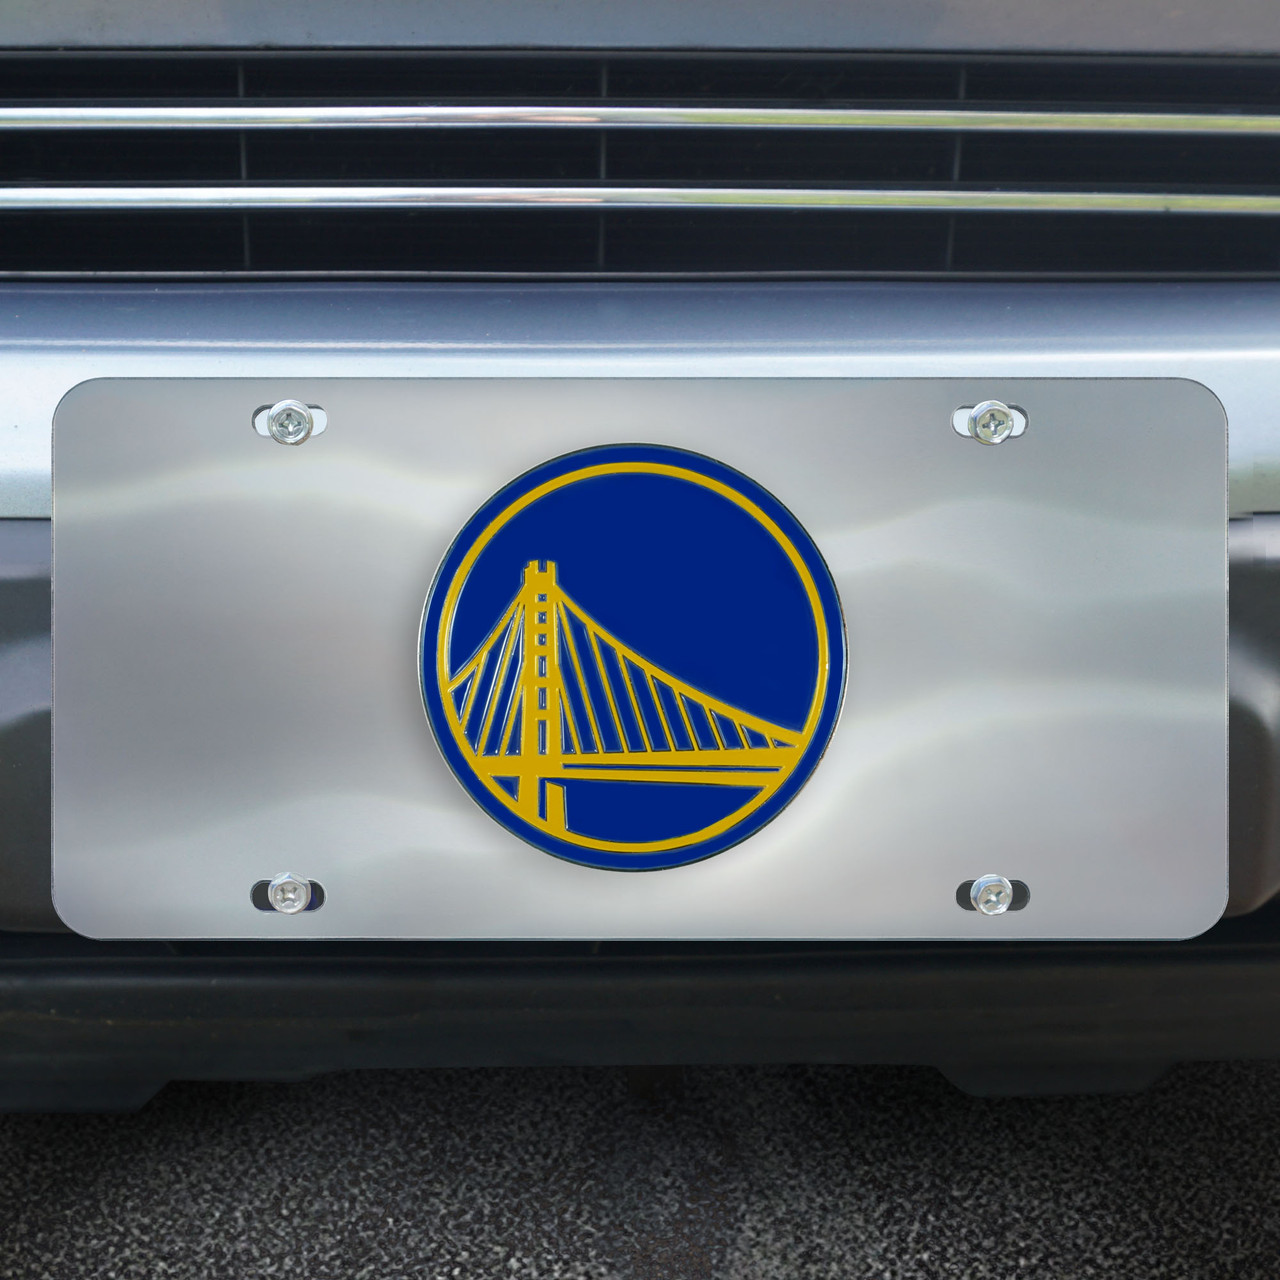 Golden State Warriors Team NBA Metal License Plate Frame for Front